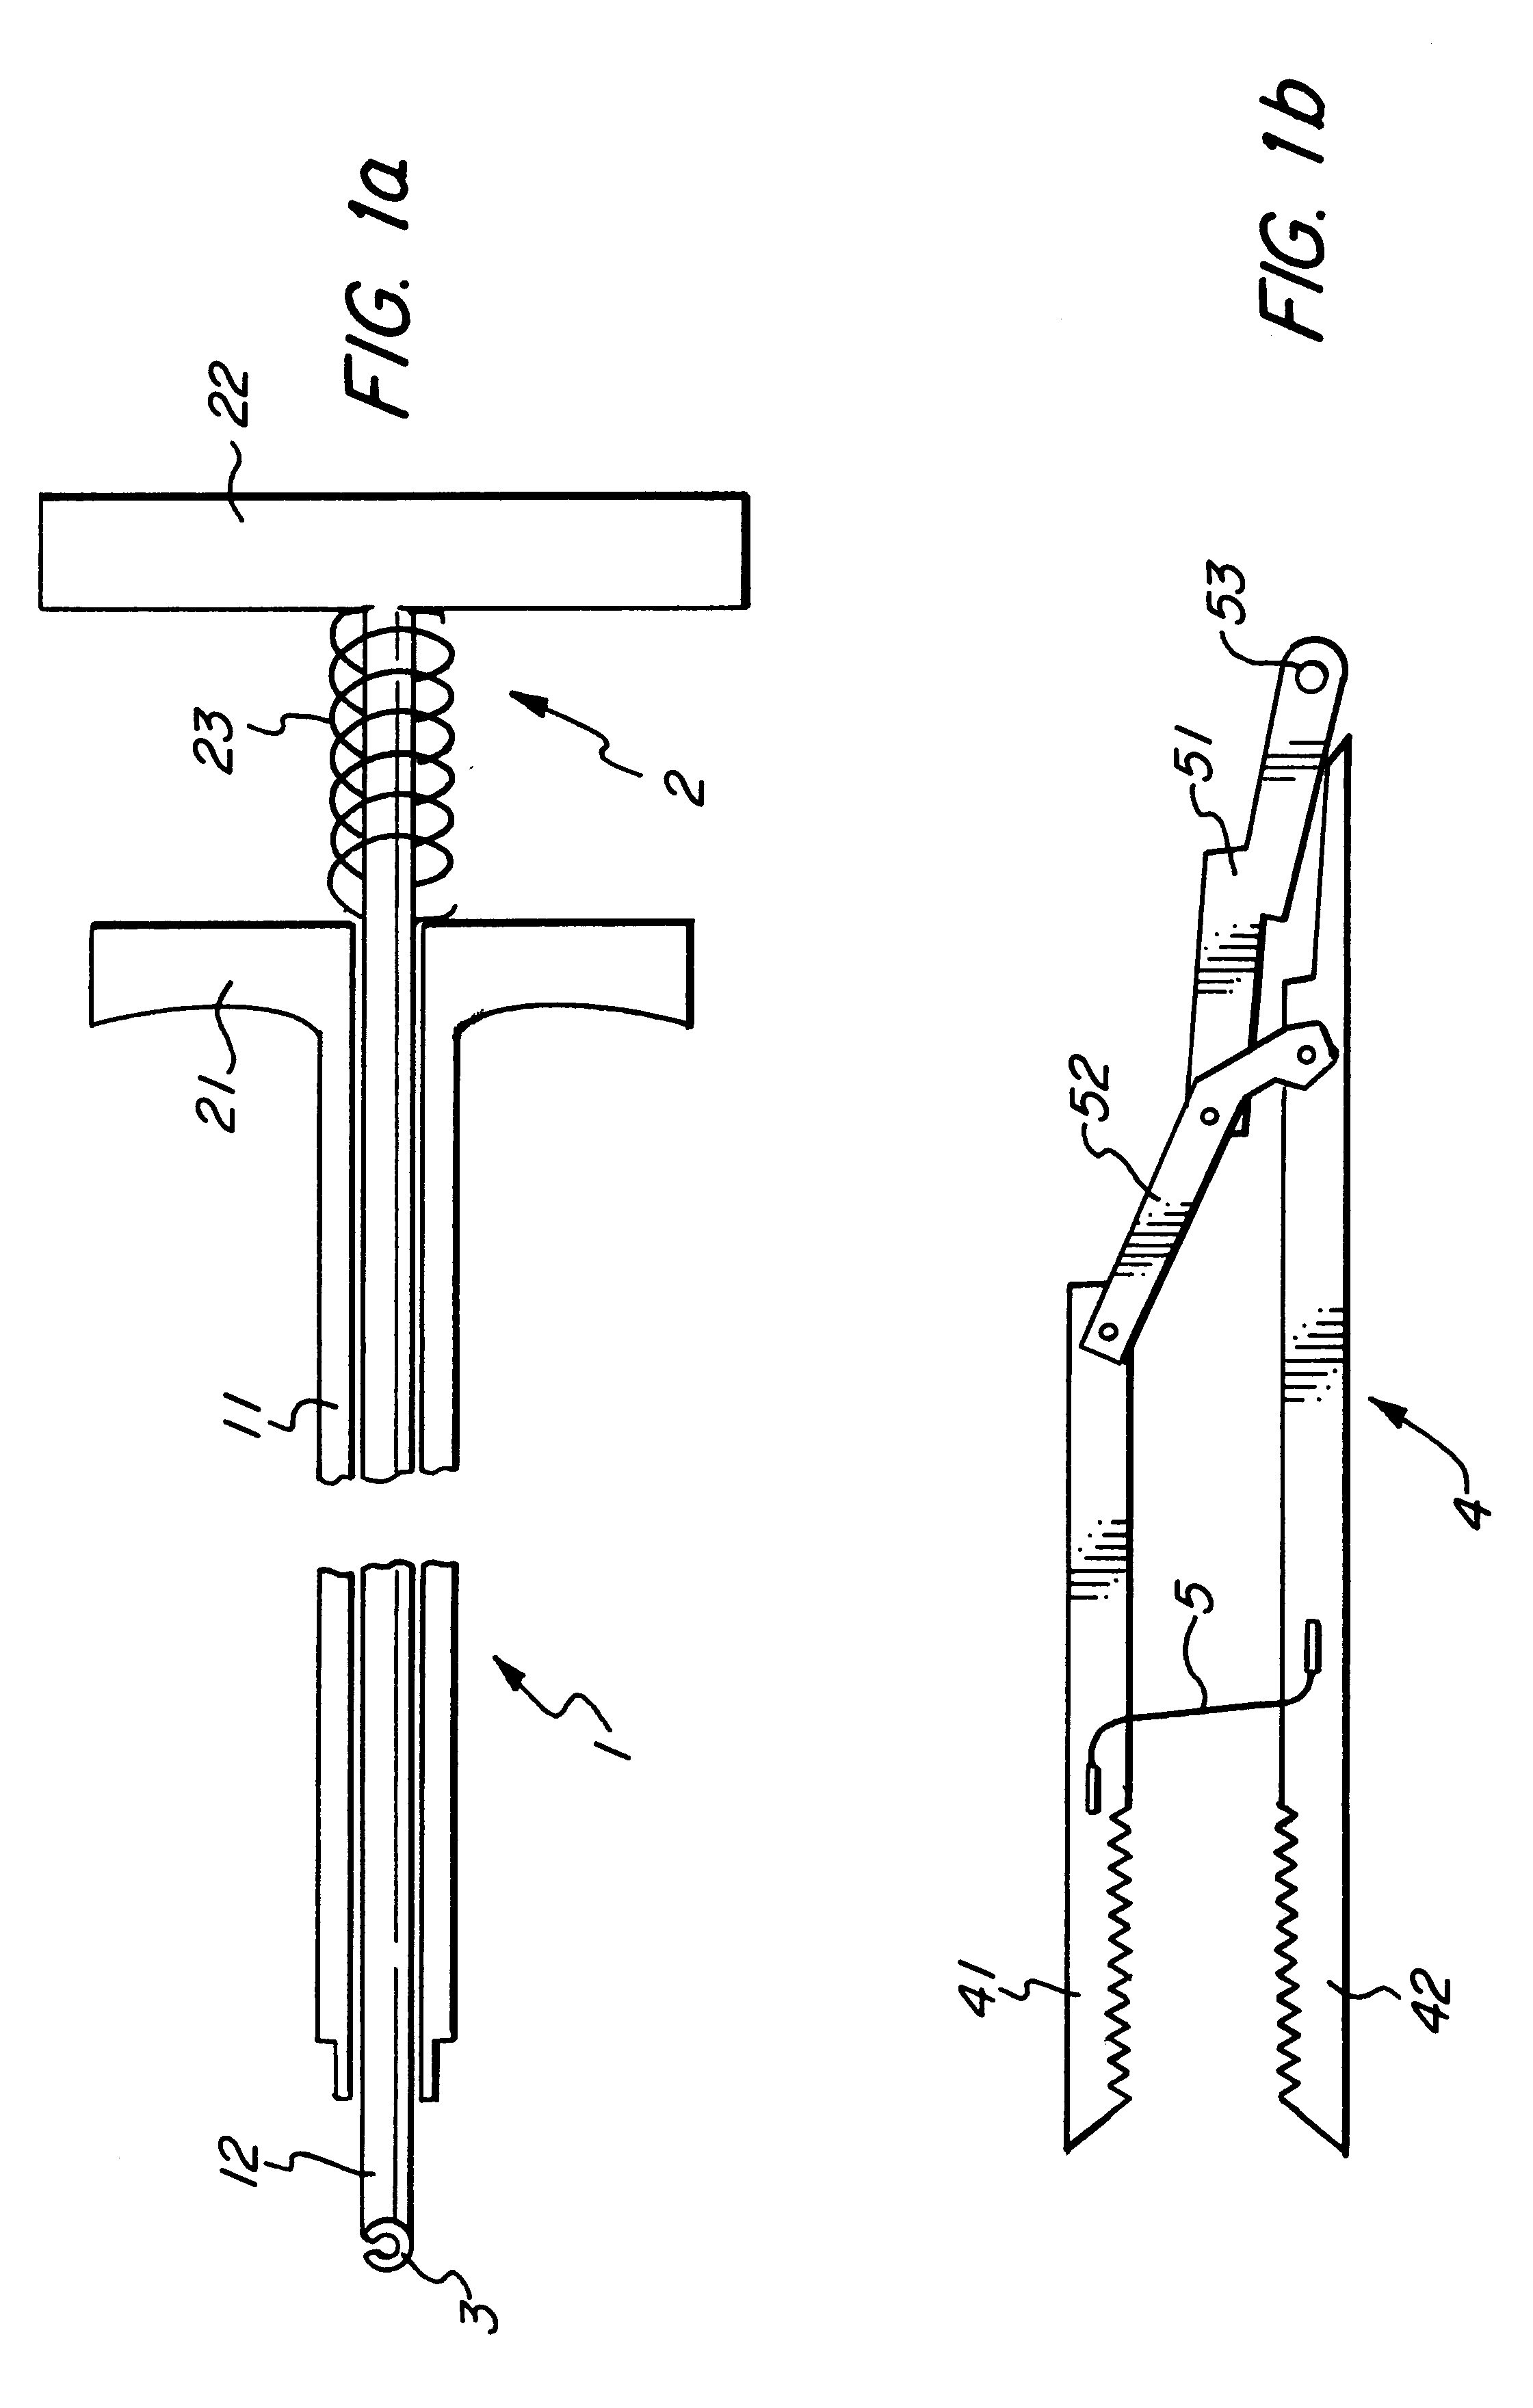 Instrument for use in endoscopic surgery